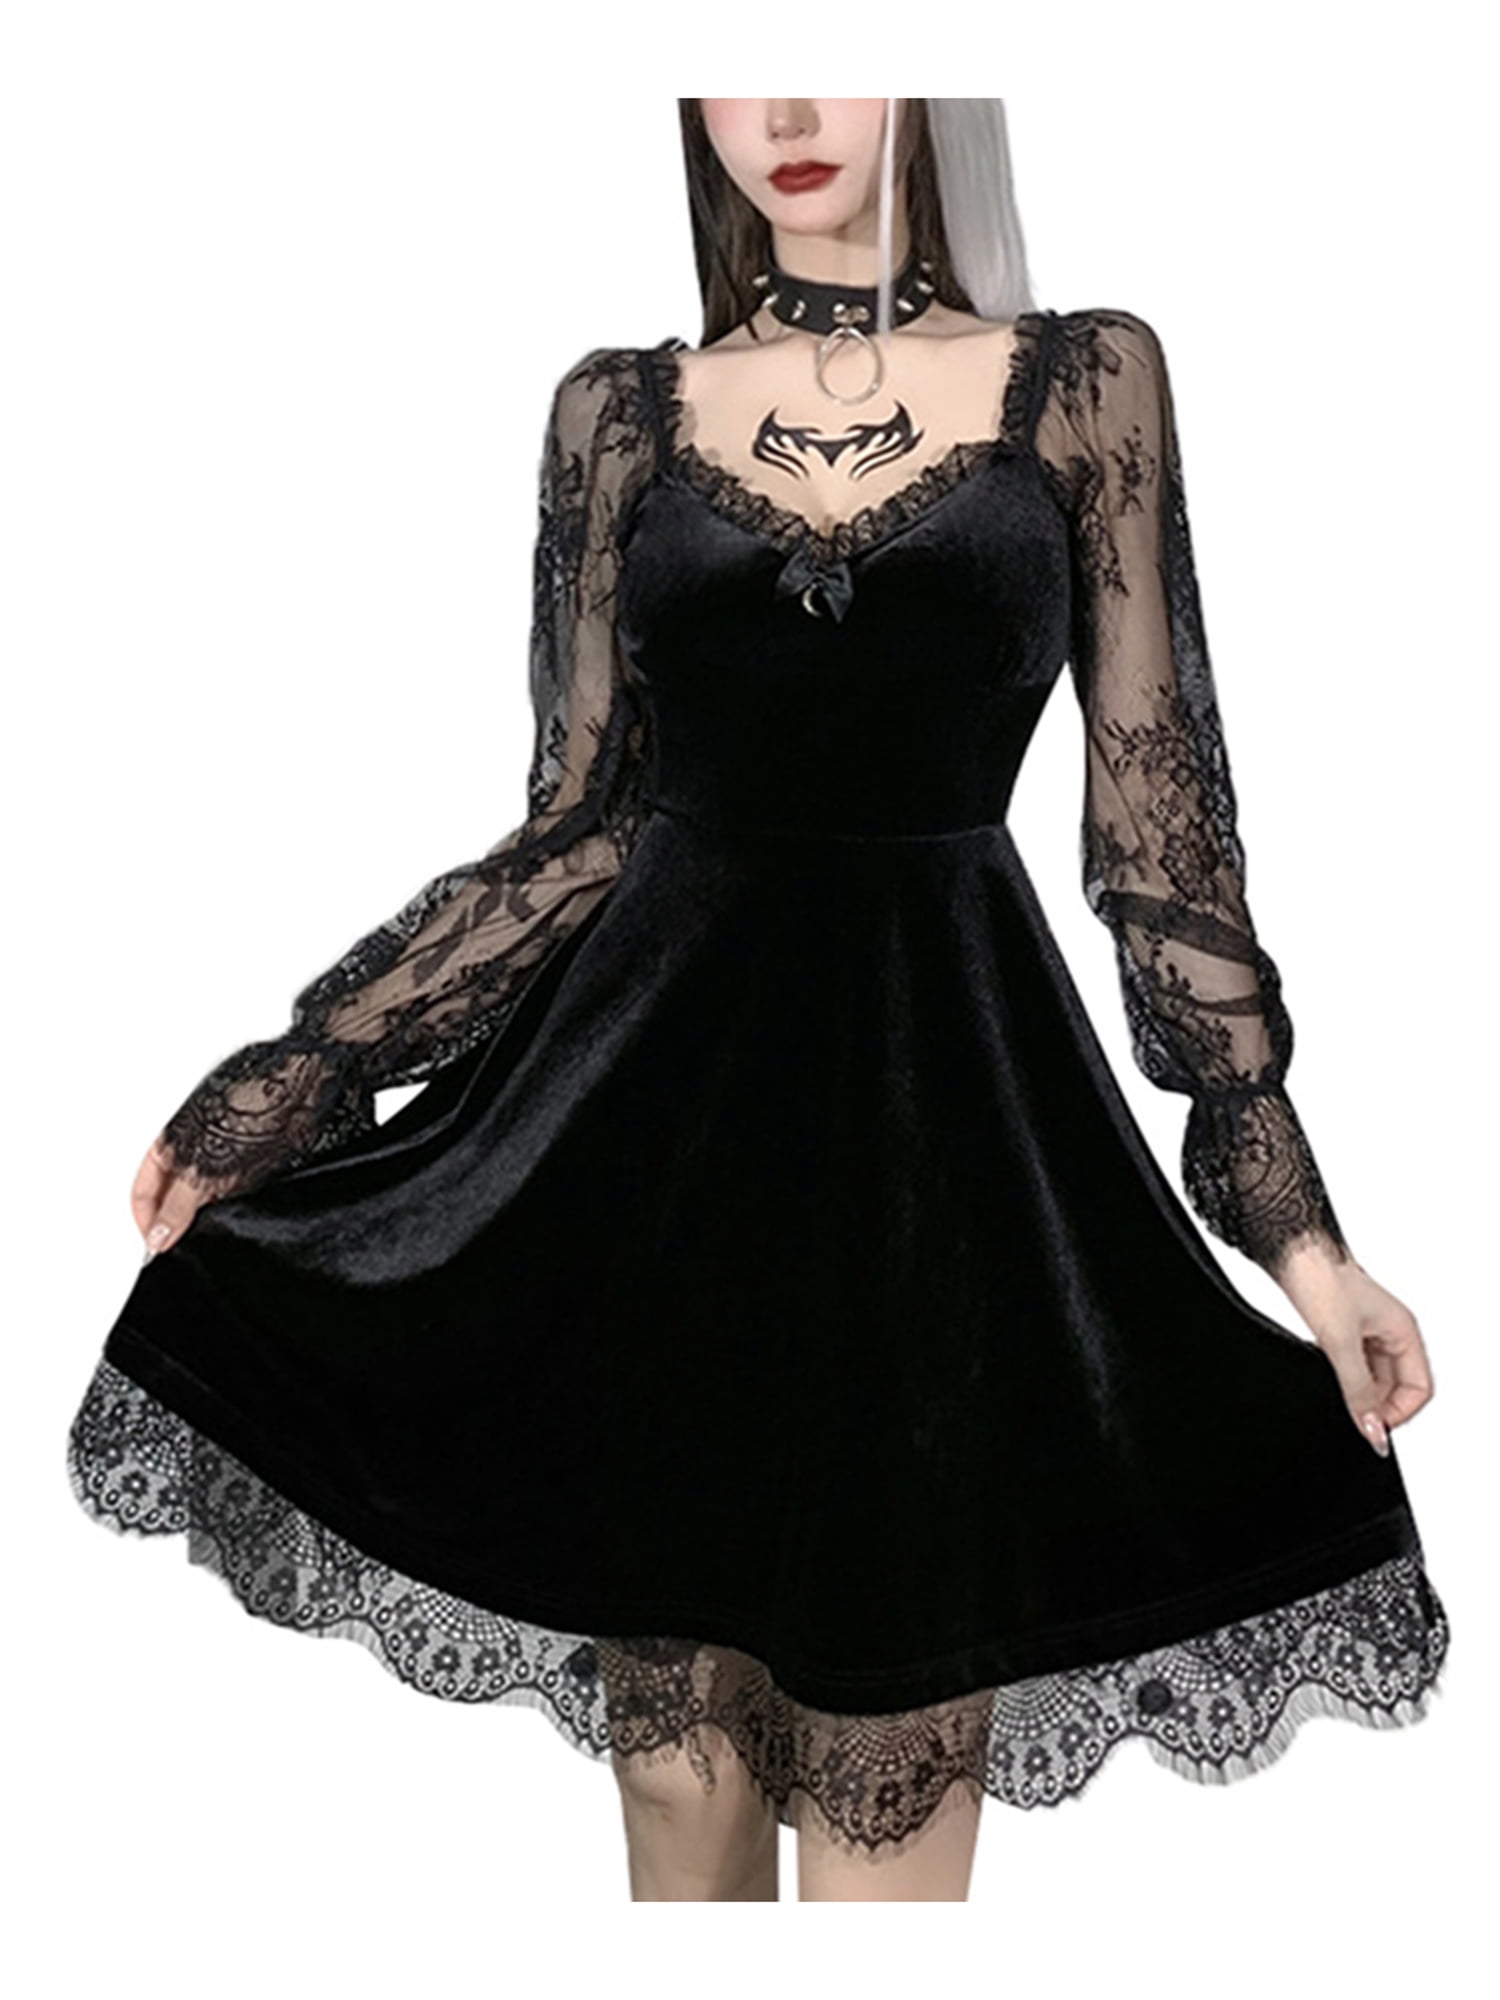 Black gothic Dress In Store